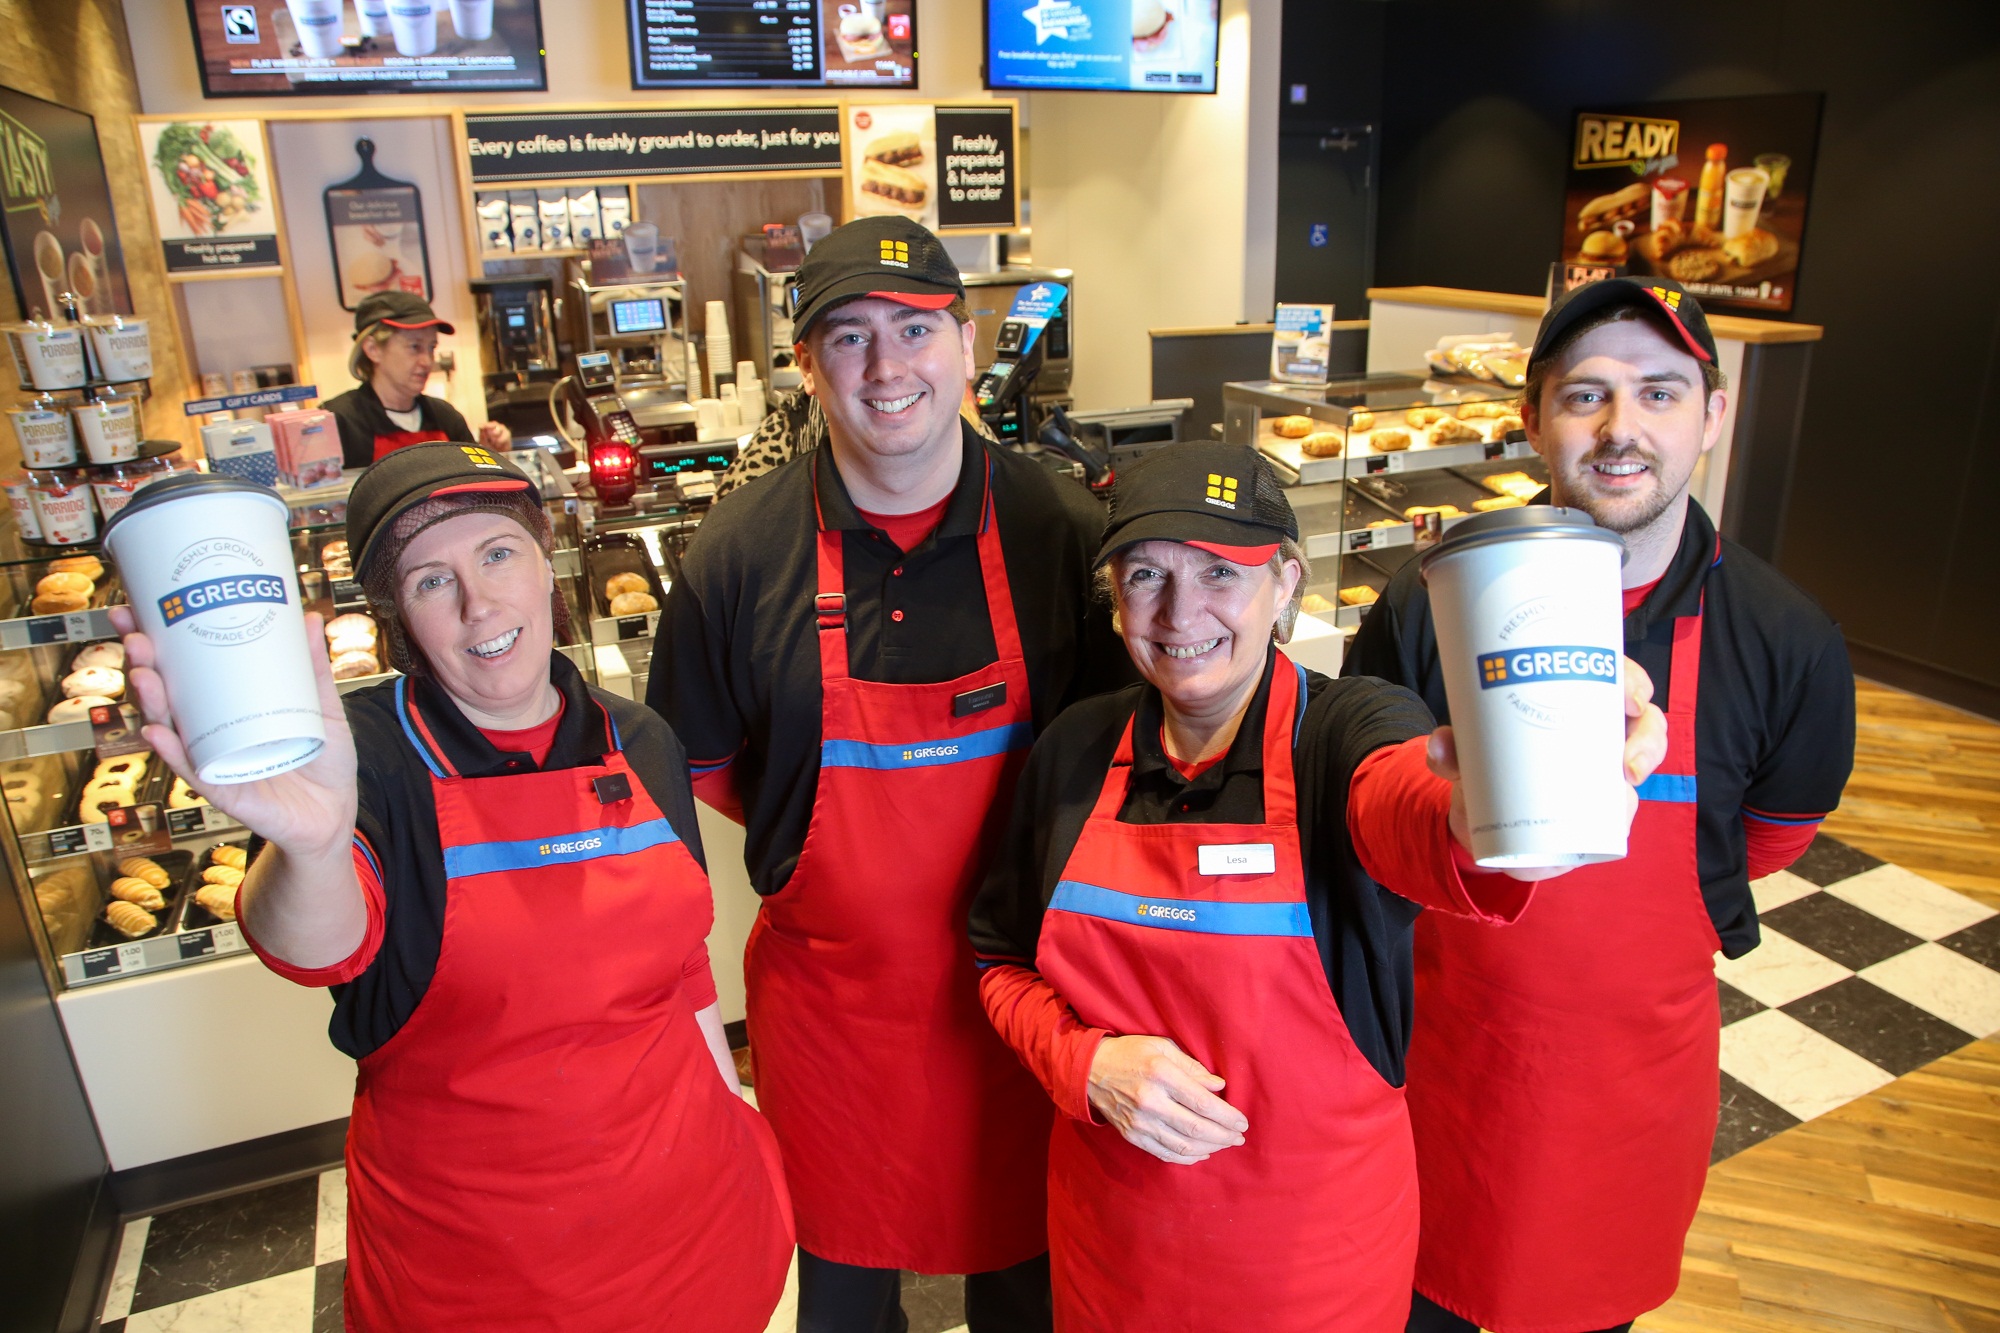 Manager of NI’s first stand-alone Greggs ‘extremely proud’